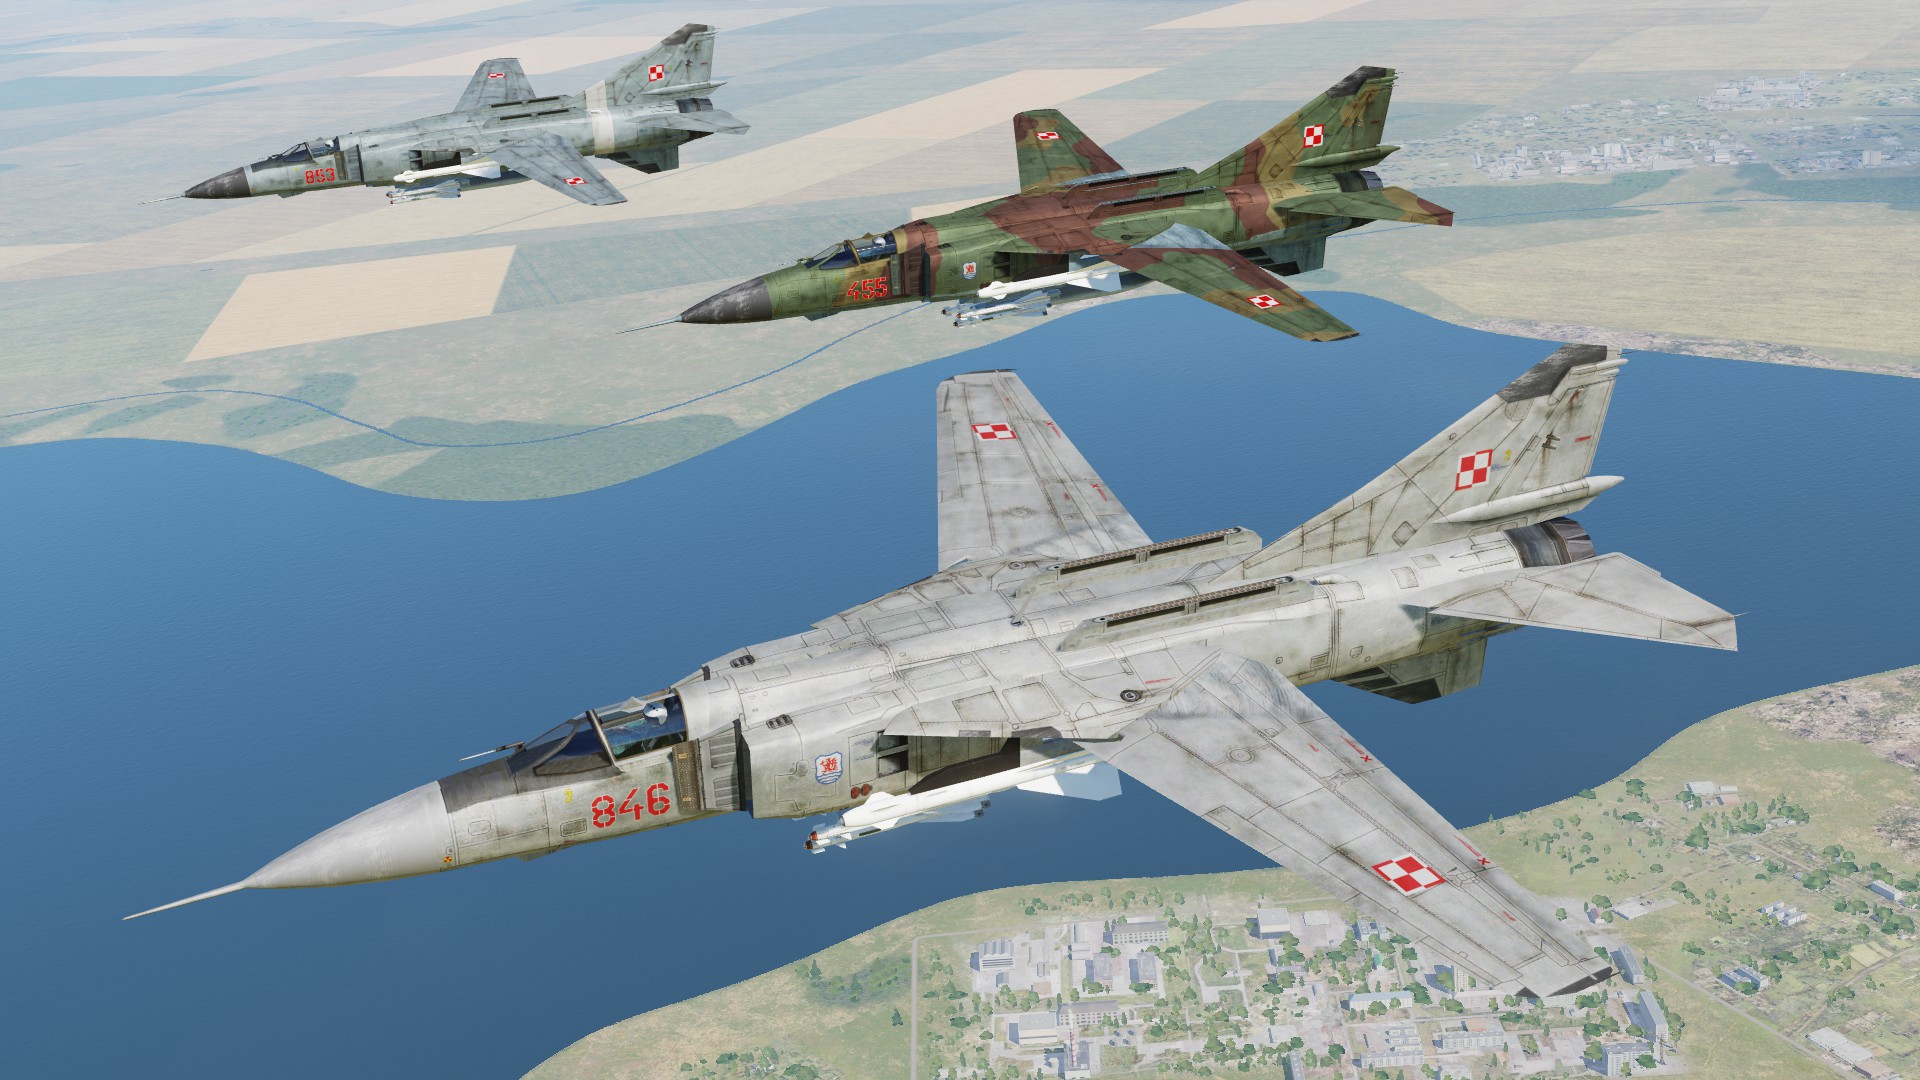 Formation Mig-23 Floggers